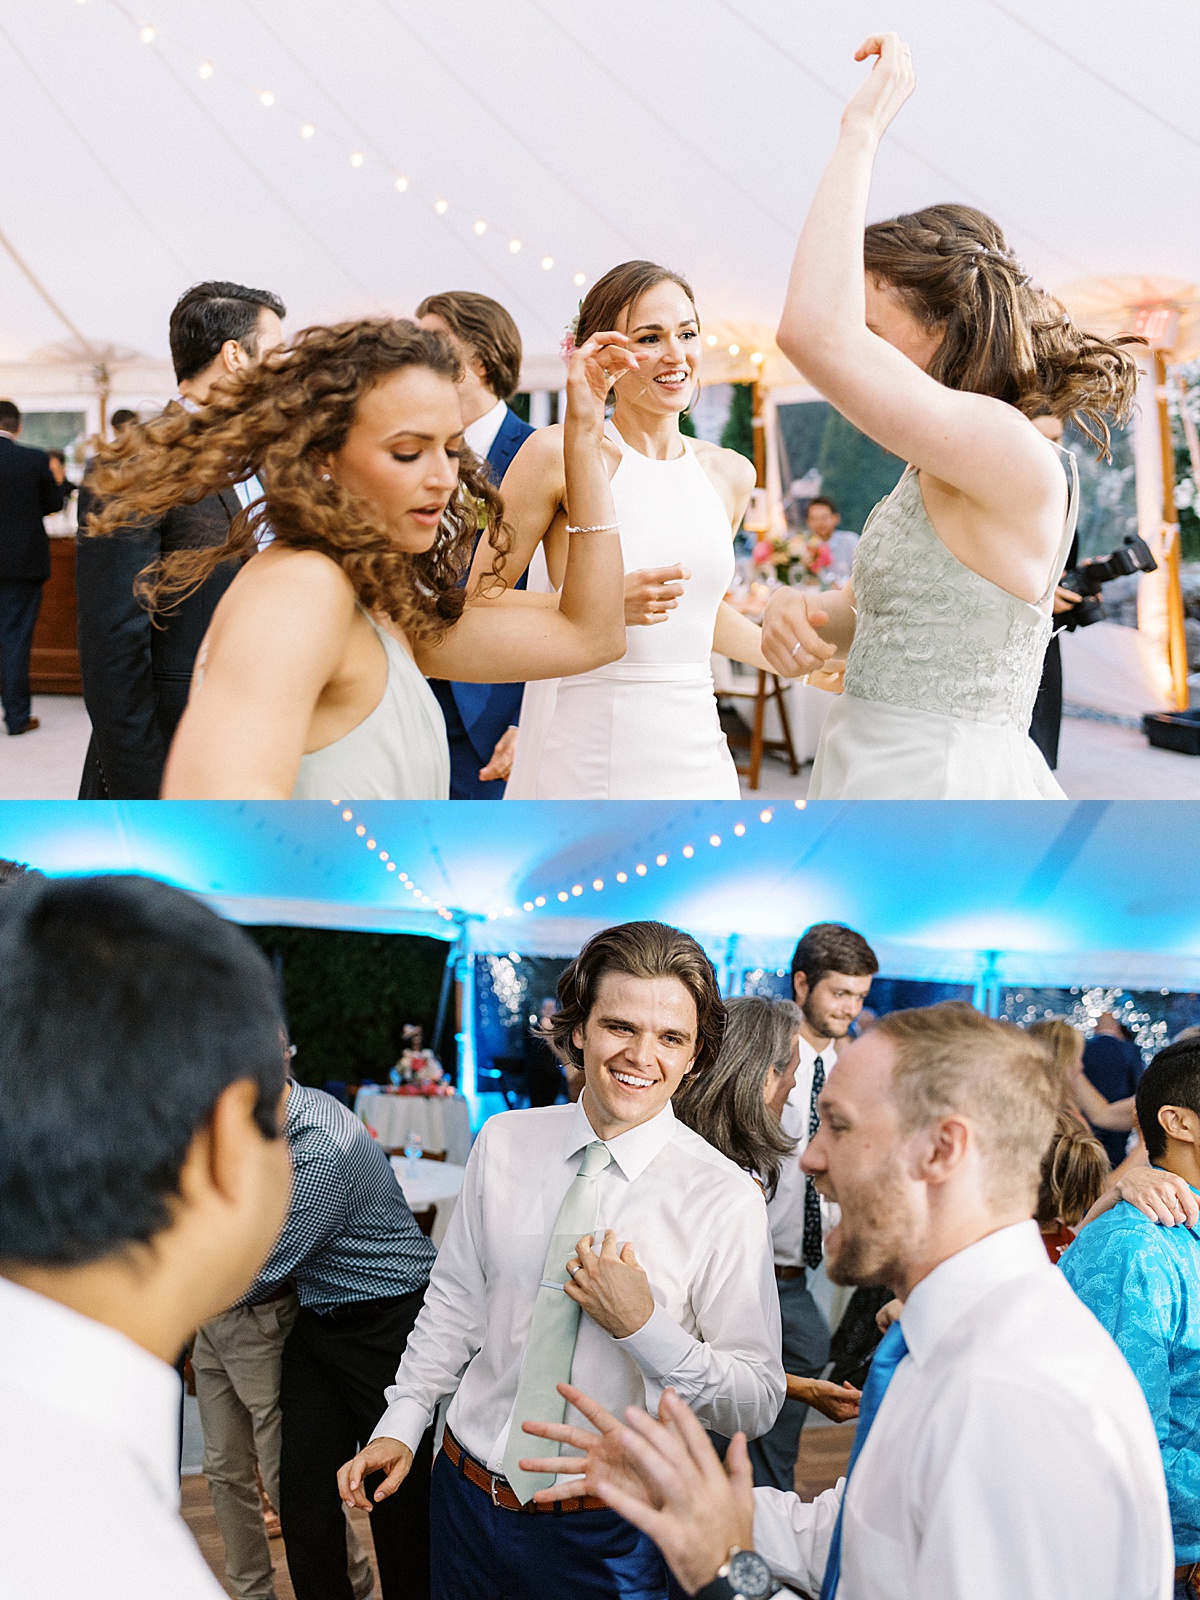 bride and groom at classy garden ceremony dance with guests at reception shot by Massachusetts wedding photographer